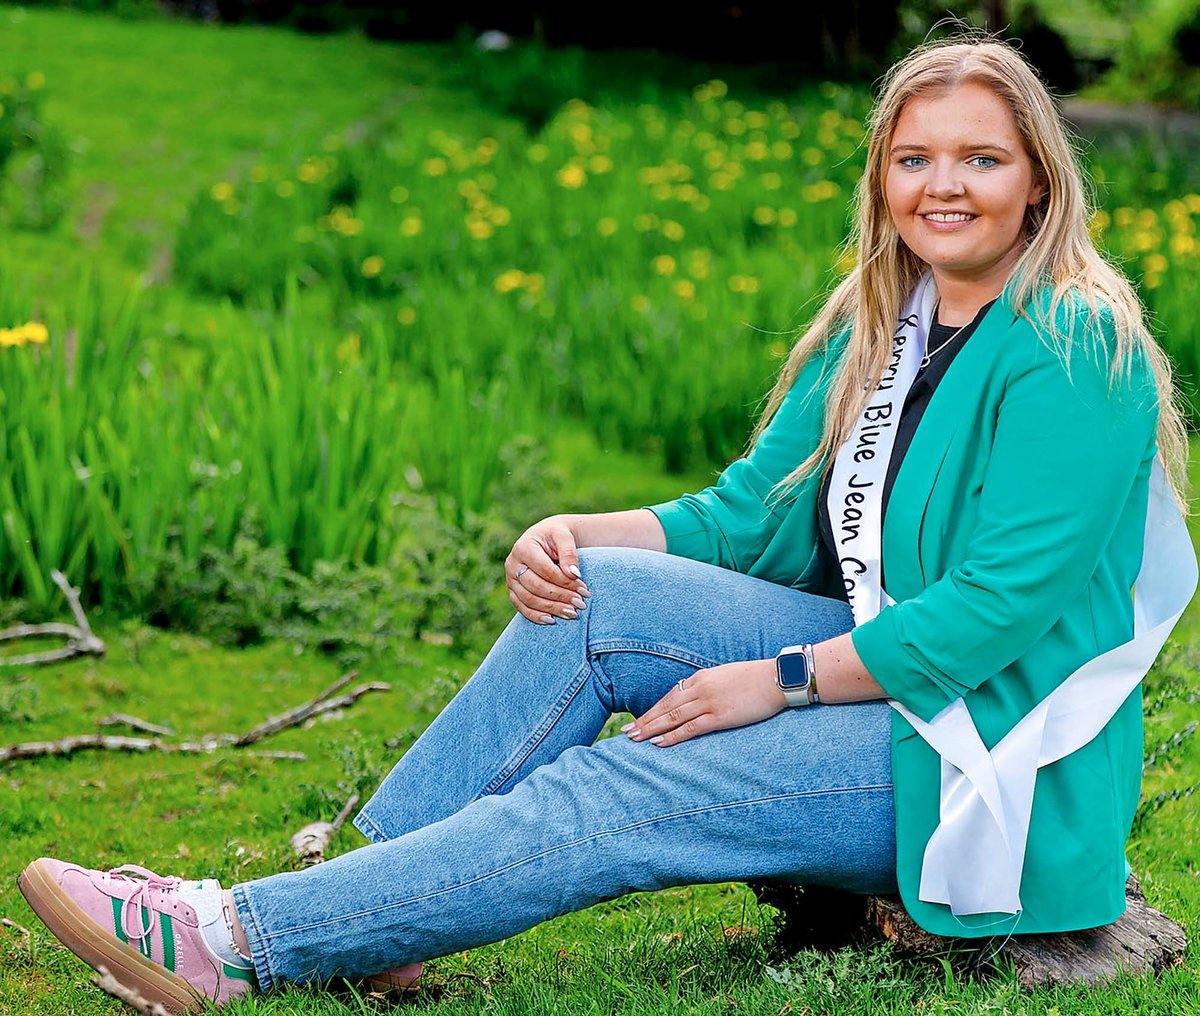 Mucking in on the farm might not be every beauty queen’s dream but it’s high up on the list for Kerry Macra’s Blue Jean Country Queen Louise Foley, a qualified primary school teacher with plans to run her own farm. Read Louise’s story in tomorrow’s Kerry’s Eye